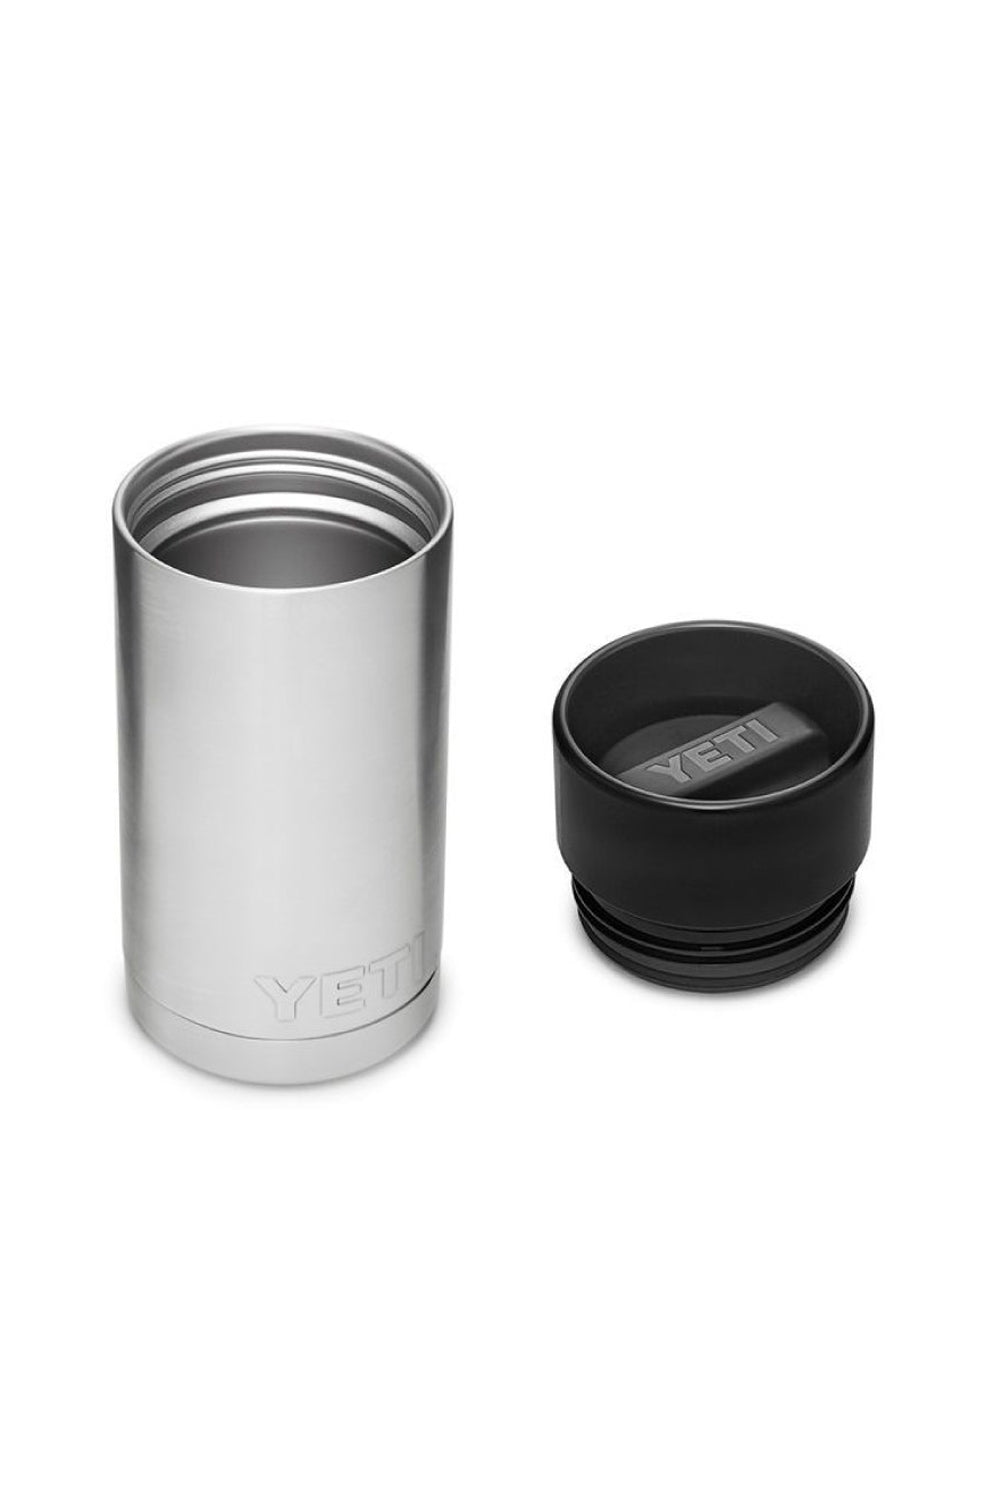 Yeti Rambler 12oz Bottle with Hotshot Cap review: hot coffee without the  hassle